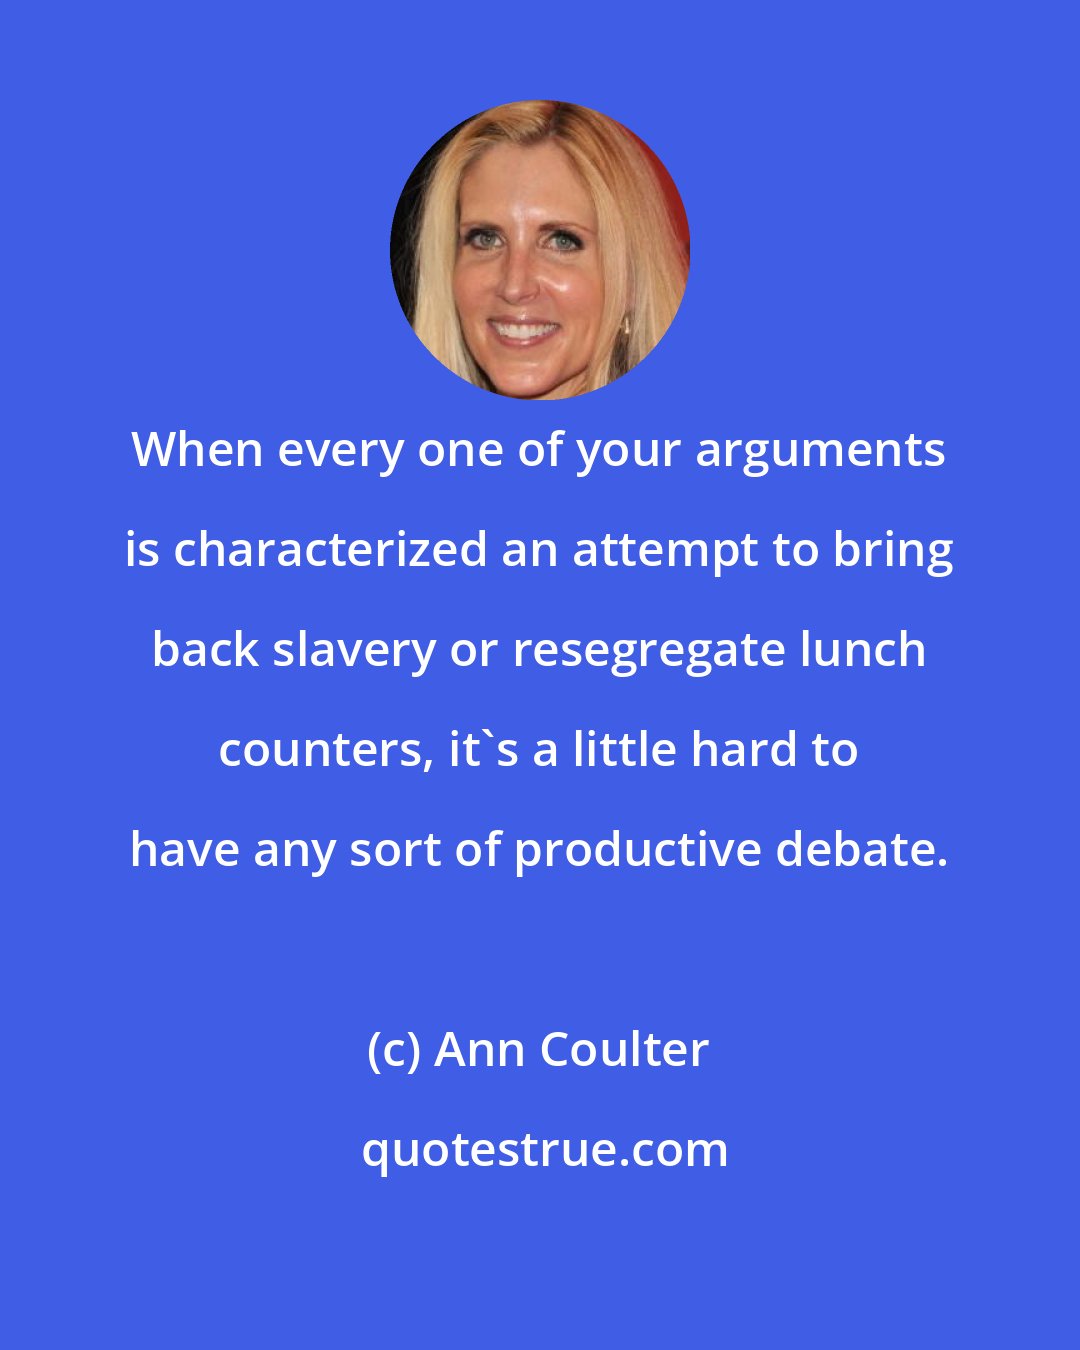 Ann Coulter: When every one of your arguments is characterized an attempt to bring back slavery or resegregate lunch counters, it's a little hard to have any sort of productive debate.